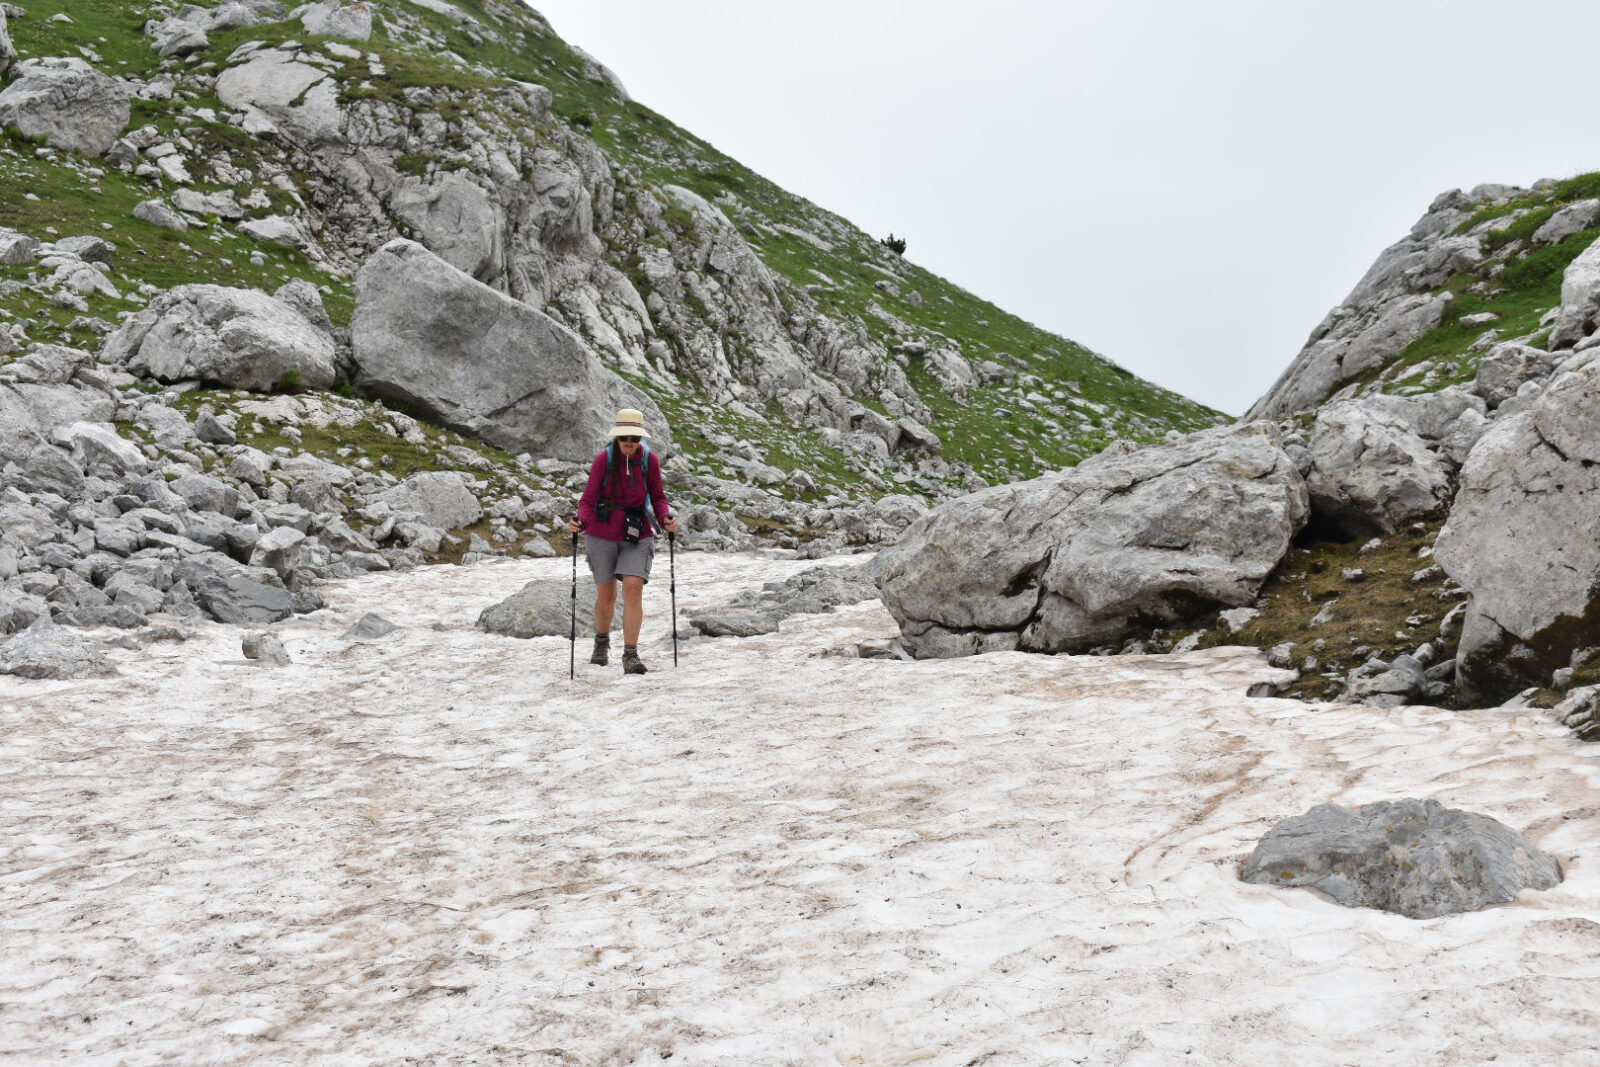 Walking across a patch of Snow in Albanian Alps